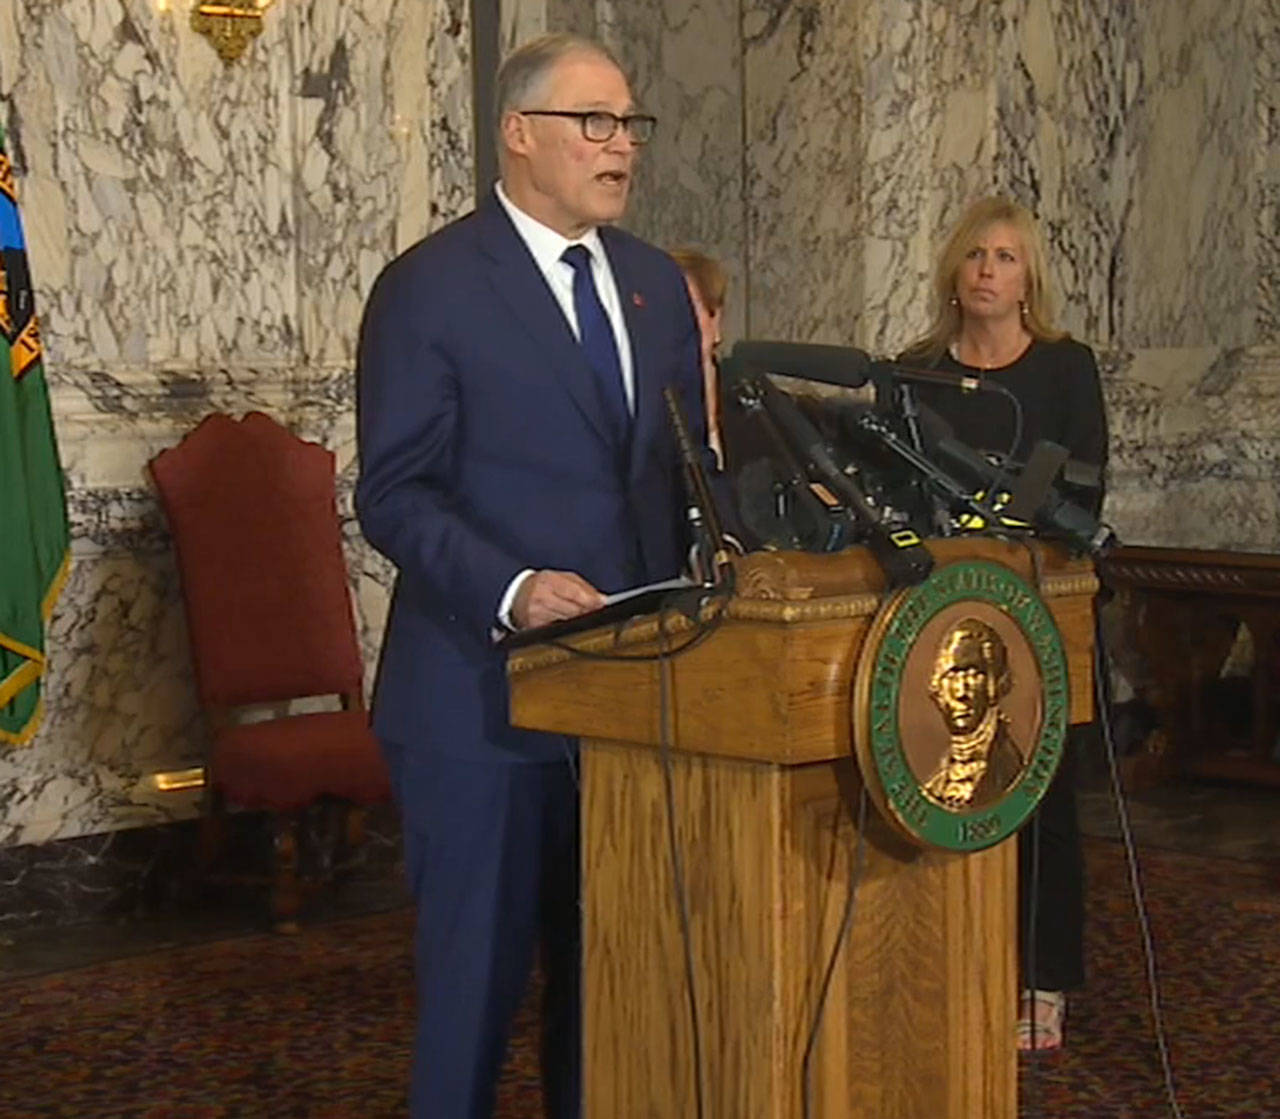 Gov. Jay Inslee speaks about closing all schools for six weeks in King, Pierce and Snohomish counties during a press conference on Thursday afternoon. Photo courtesy of tvw.org